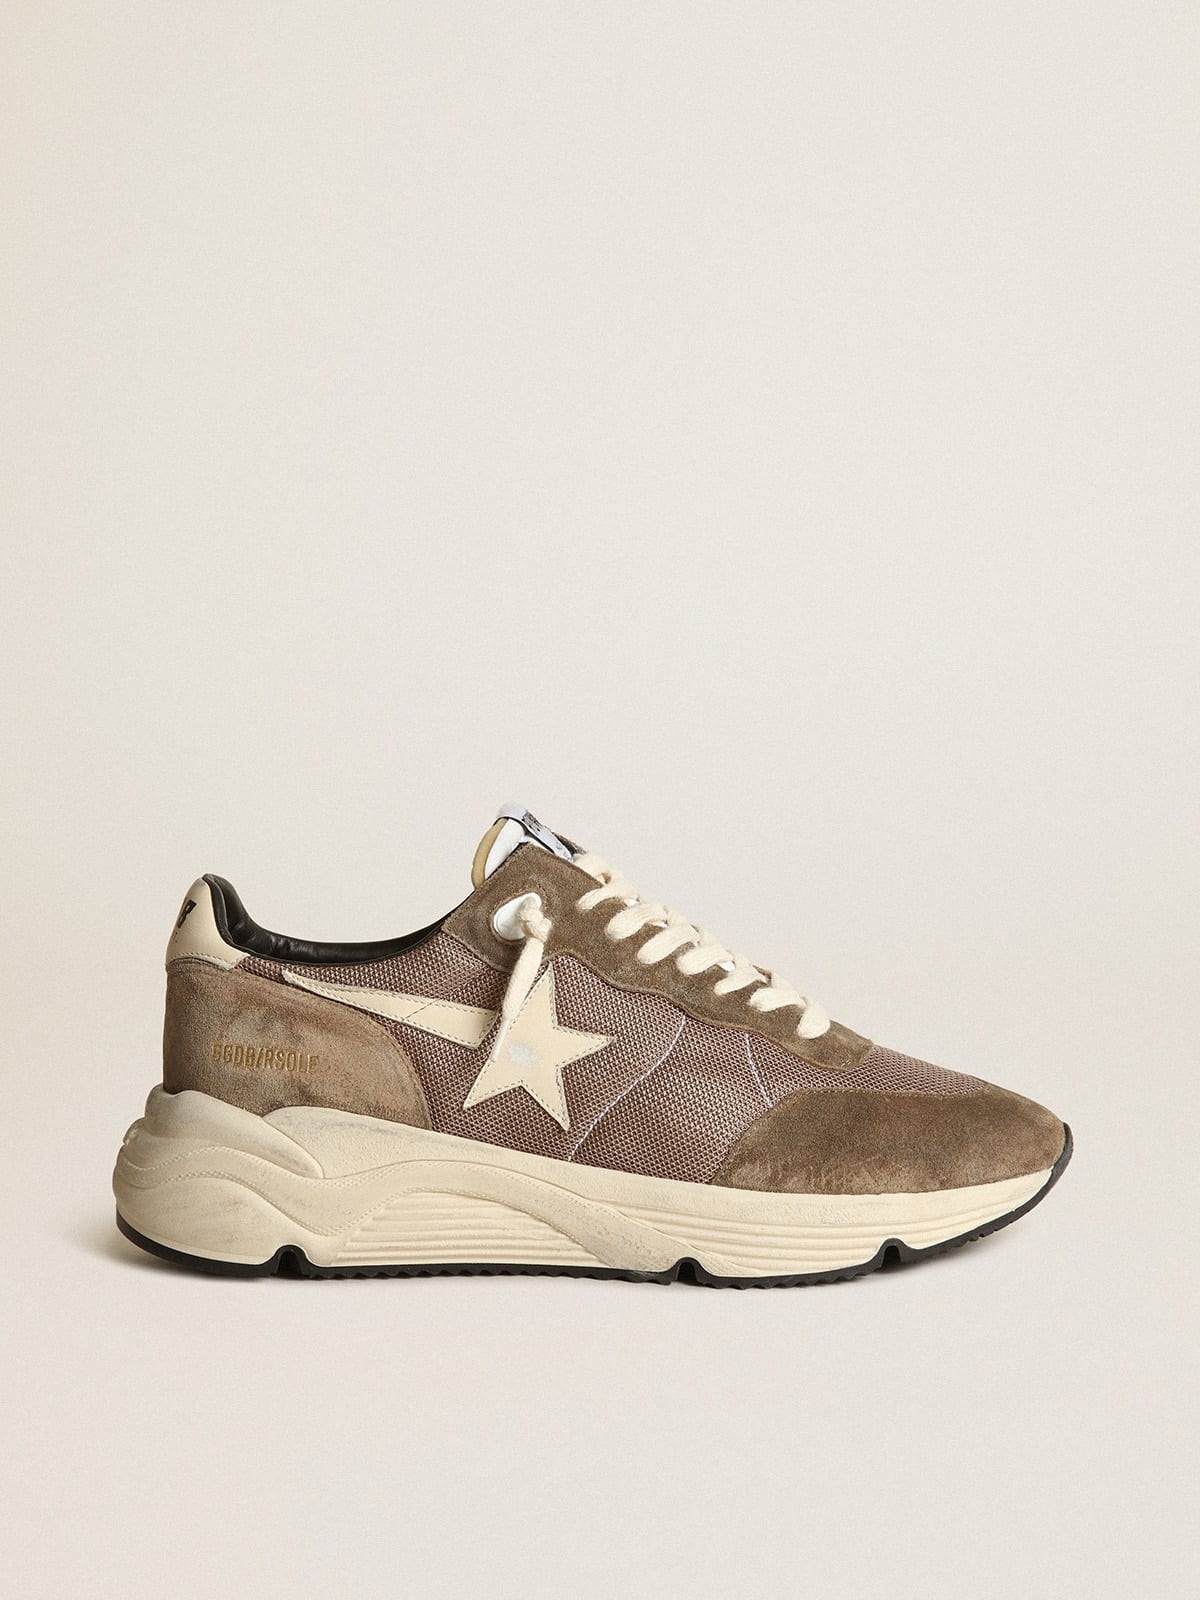 Men's Running Sole in olive green mesh and leather with cream star - 1